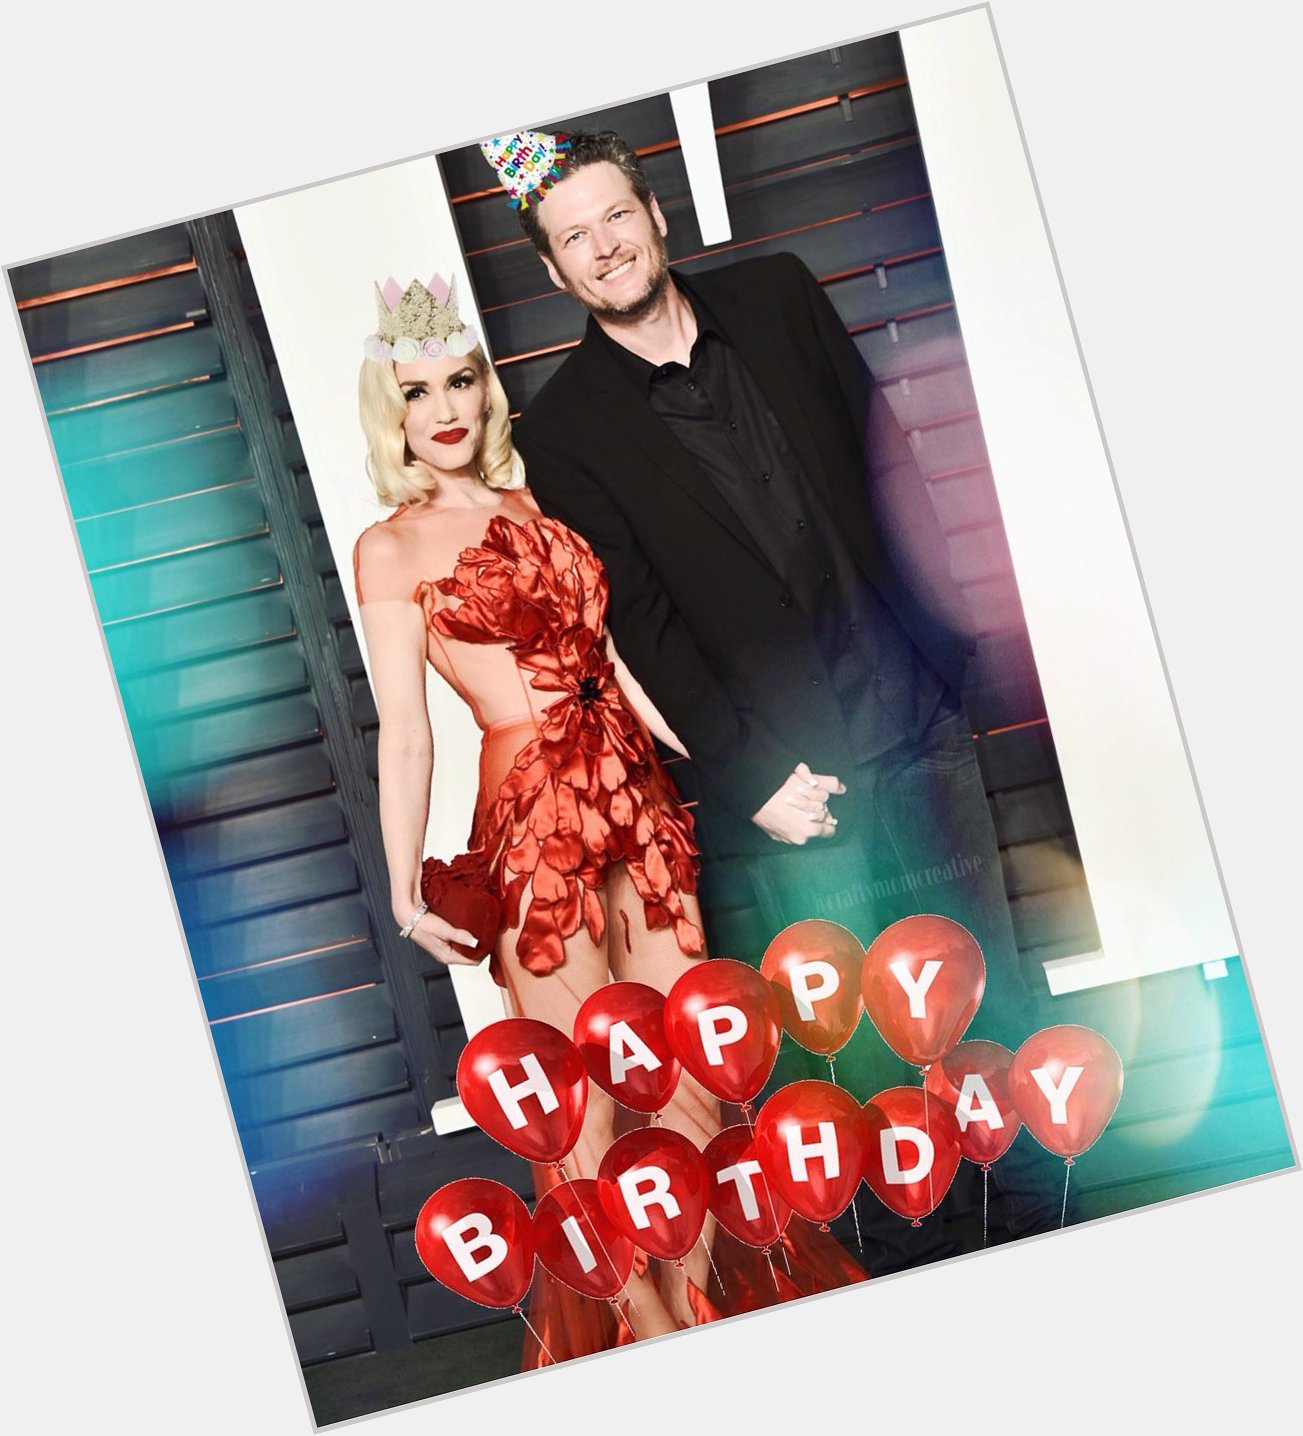 Happy birthday to the one and only Gwen Stefani! 